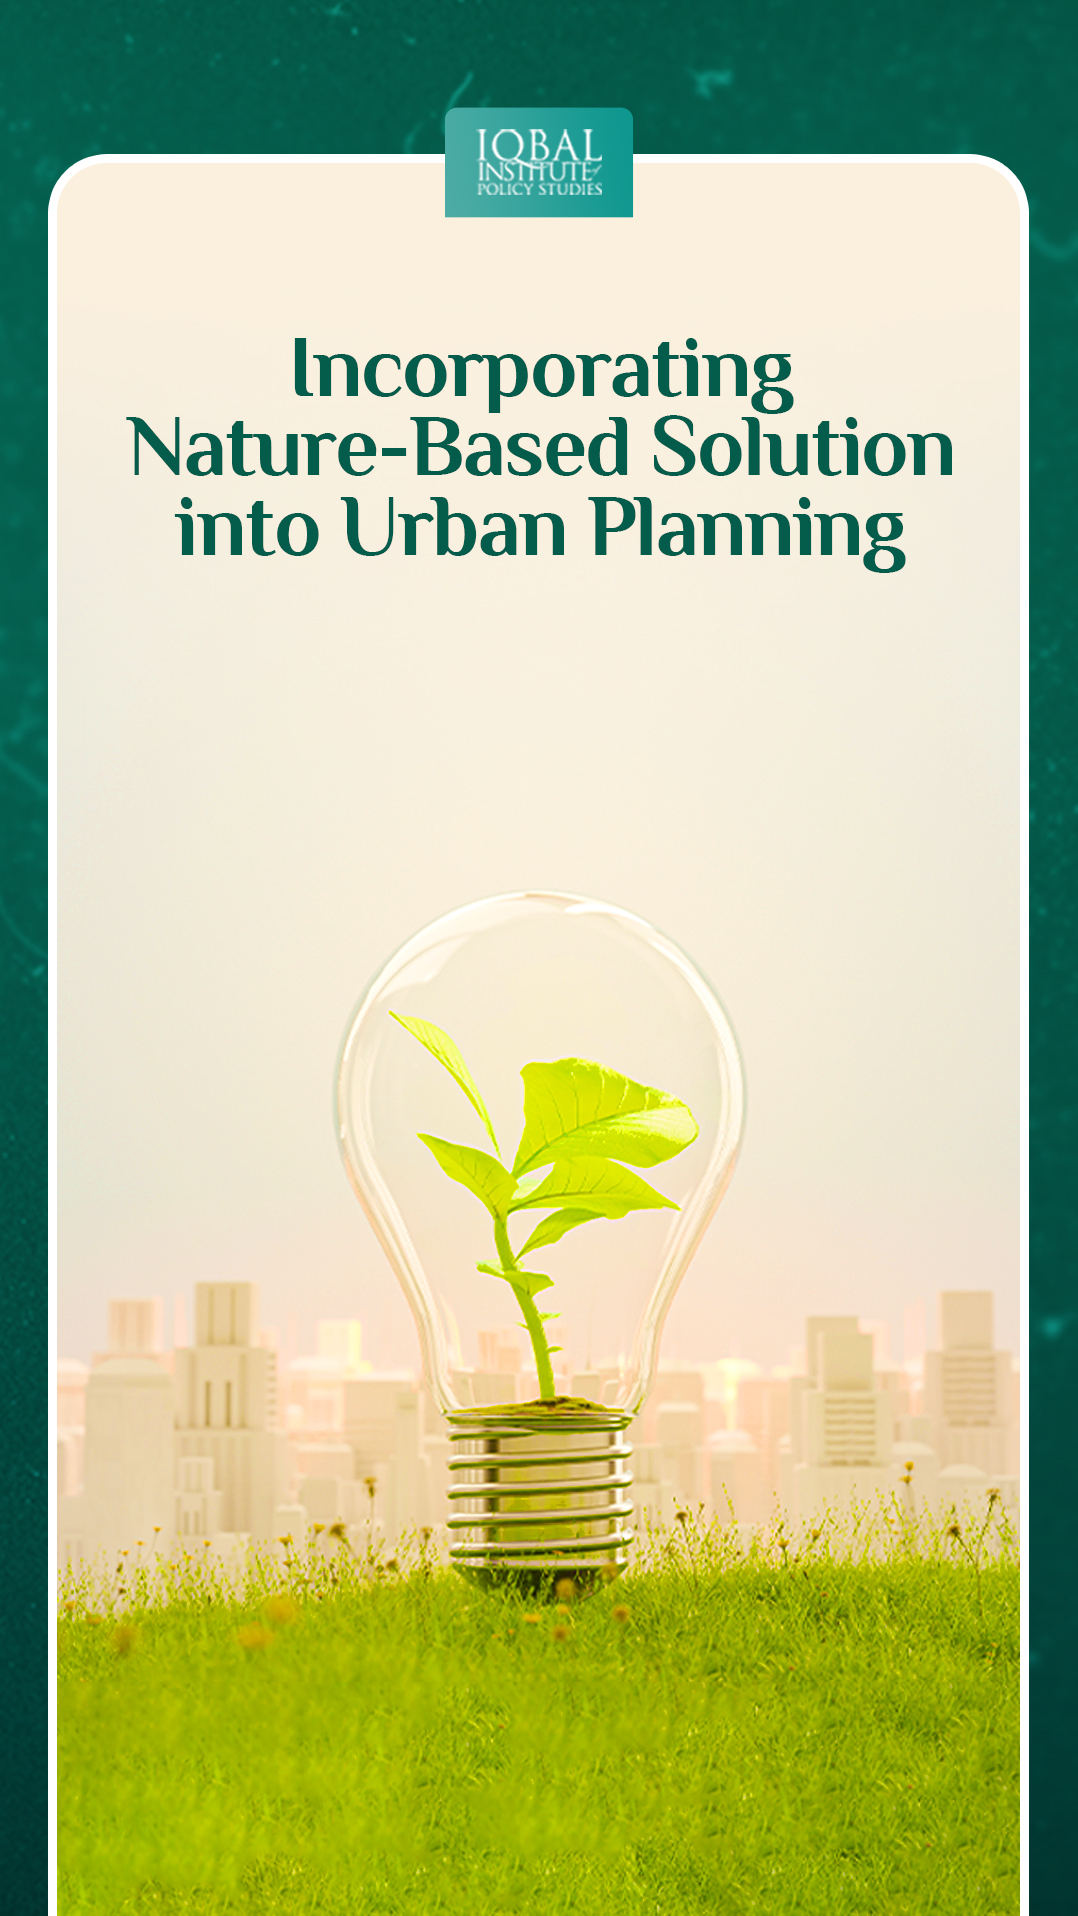 Incorporating Nature-Based Solution into Urban Planning